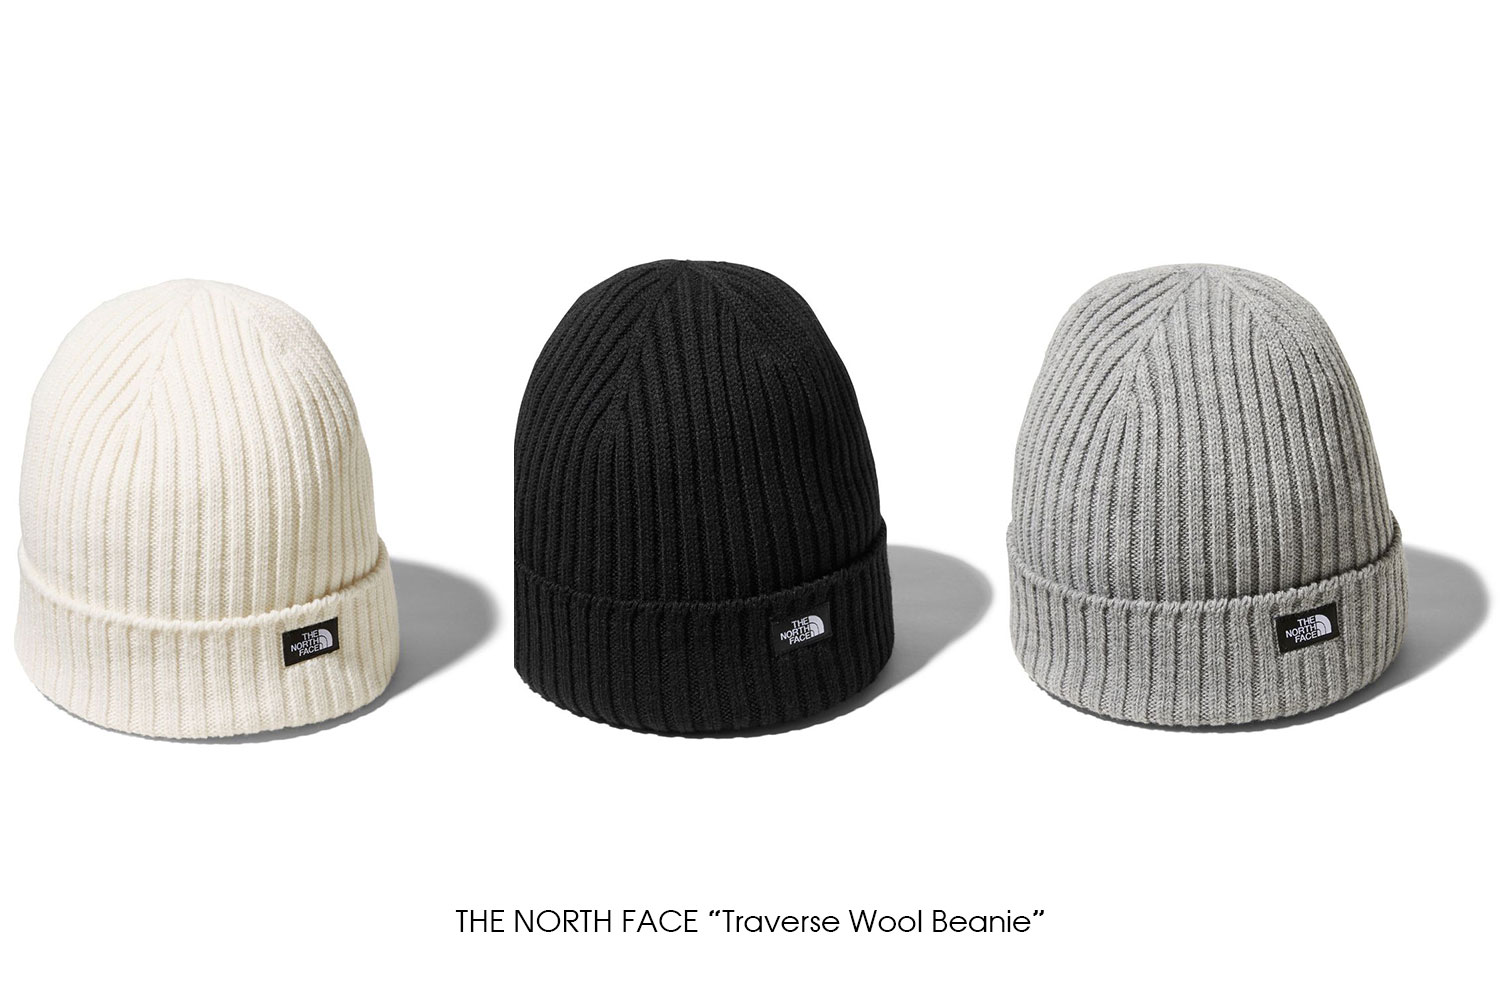 THE NORTH FACE "Traverse Wool Beanie"